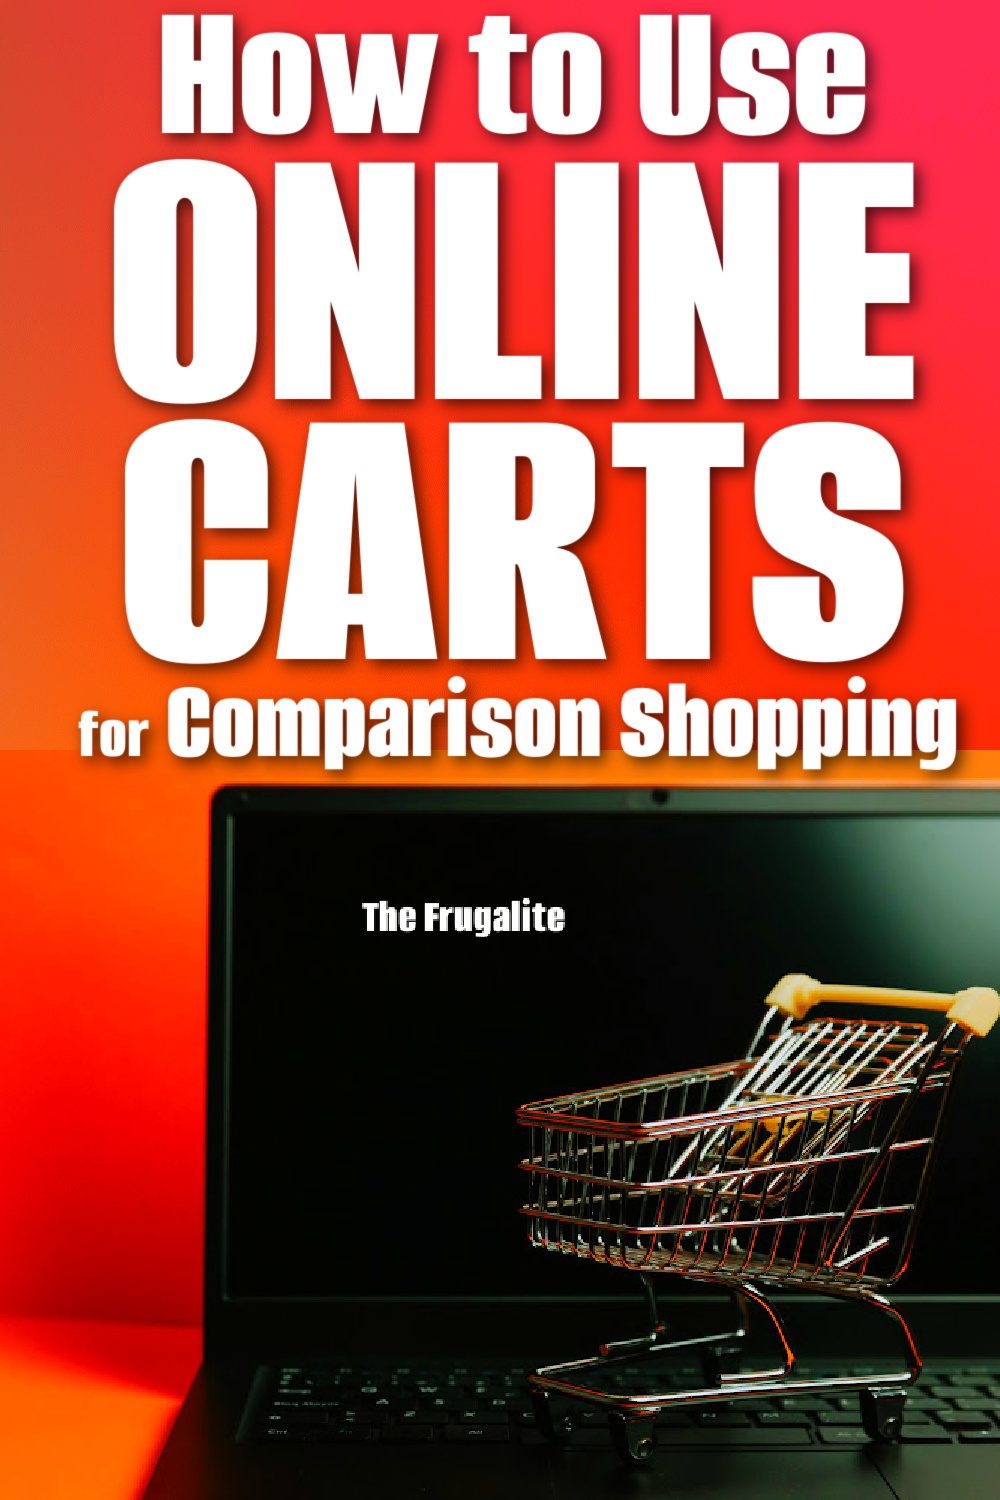 How to Use Online Carts for Comparison Shopping